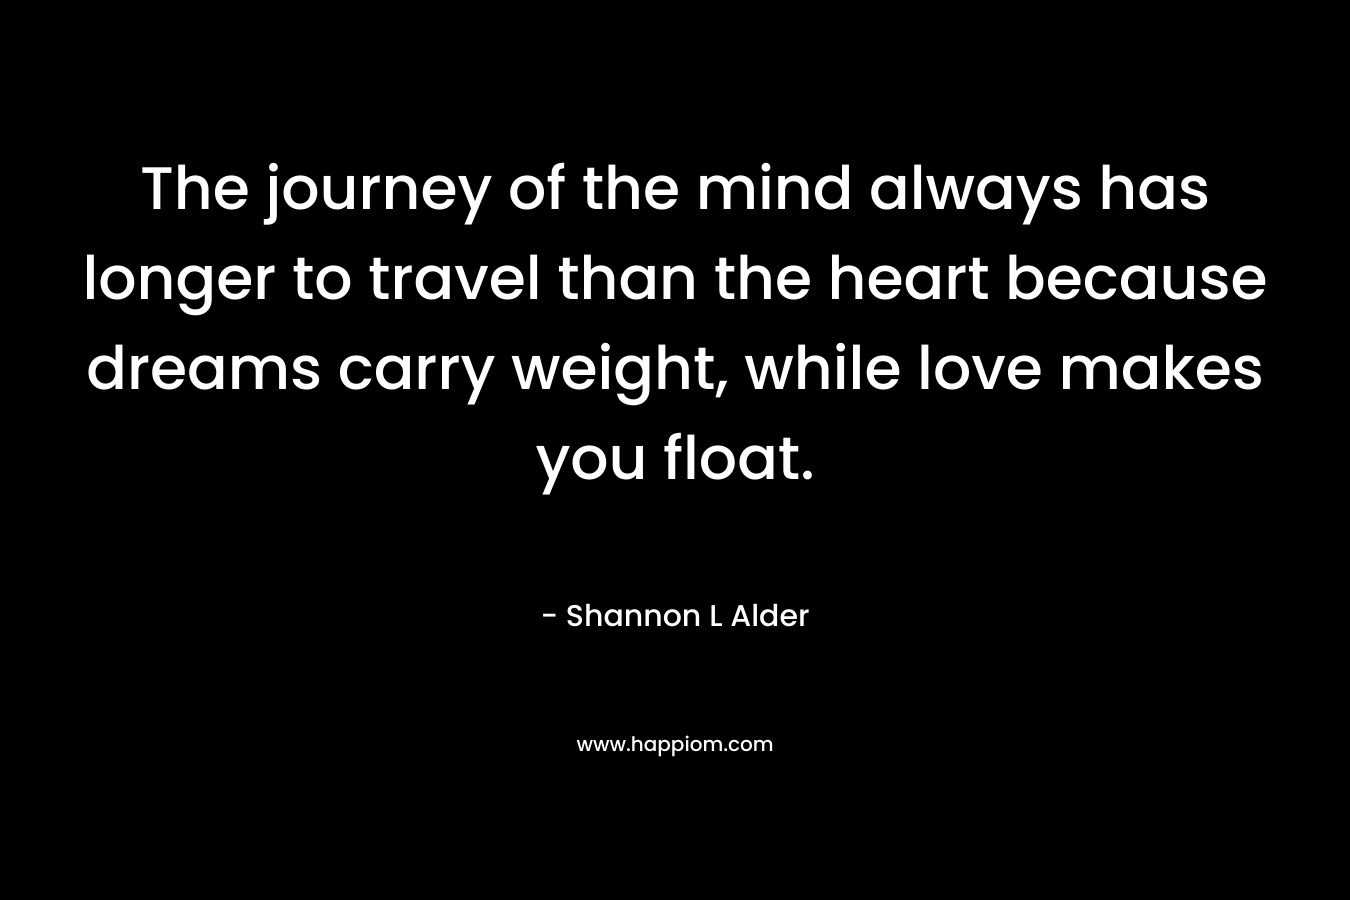 The journey of the mind always has longer to travel than the heart because dreams carry weight, while love makes you float.